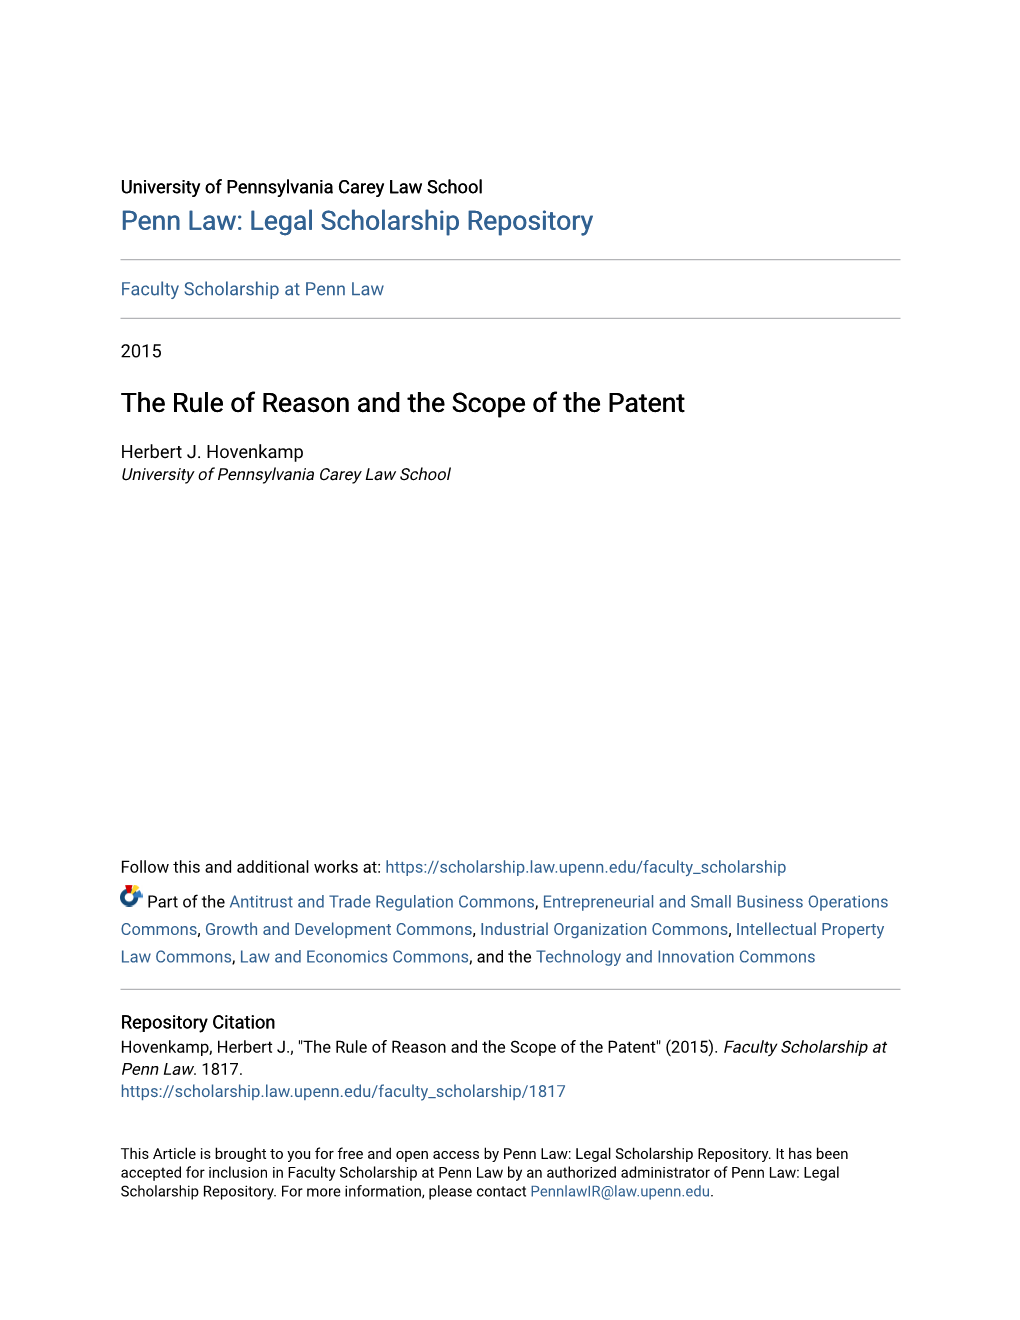 The Rule of Reason and the Scope of the Patent